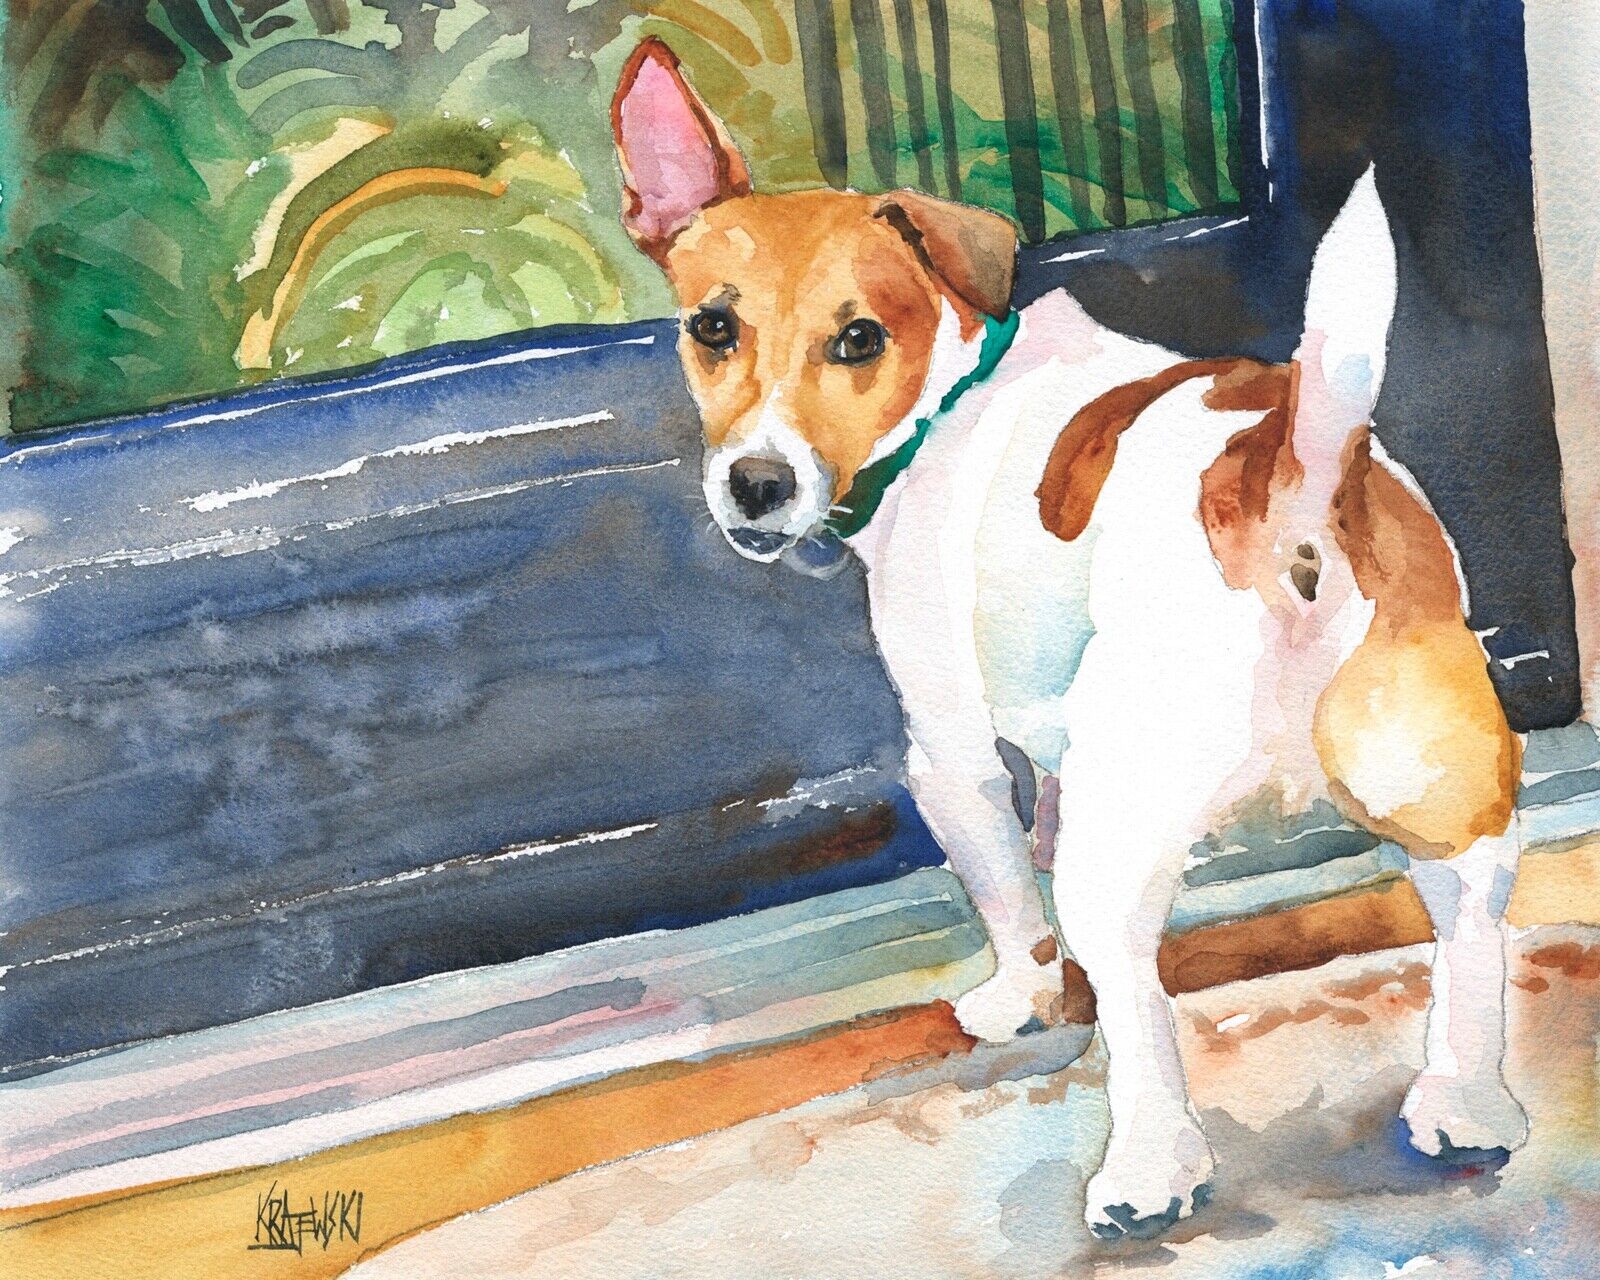 Jack Russell Terrier Art Print from Painting | Gifts, Portrait, Wall Art 8x10